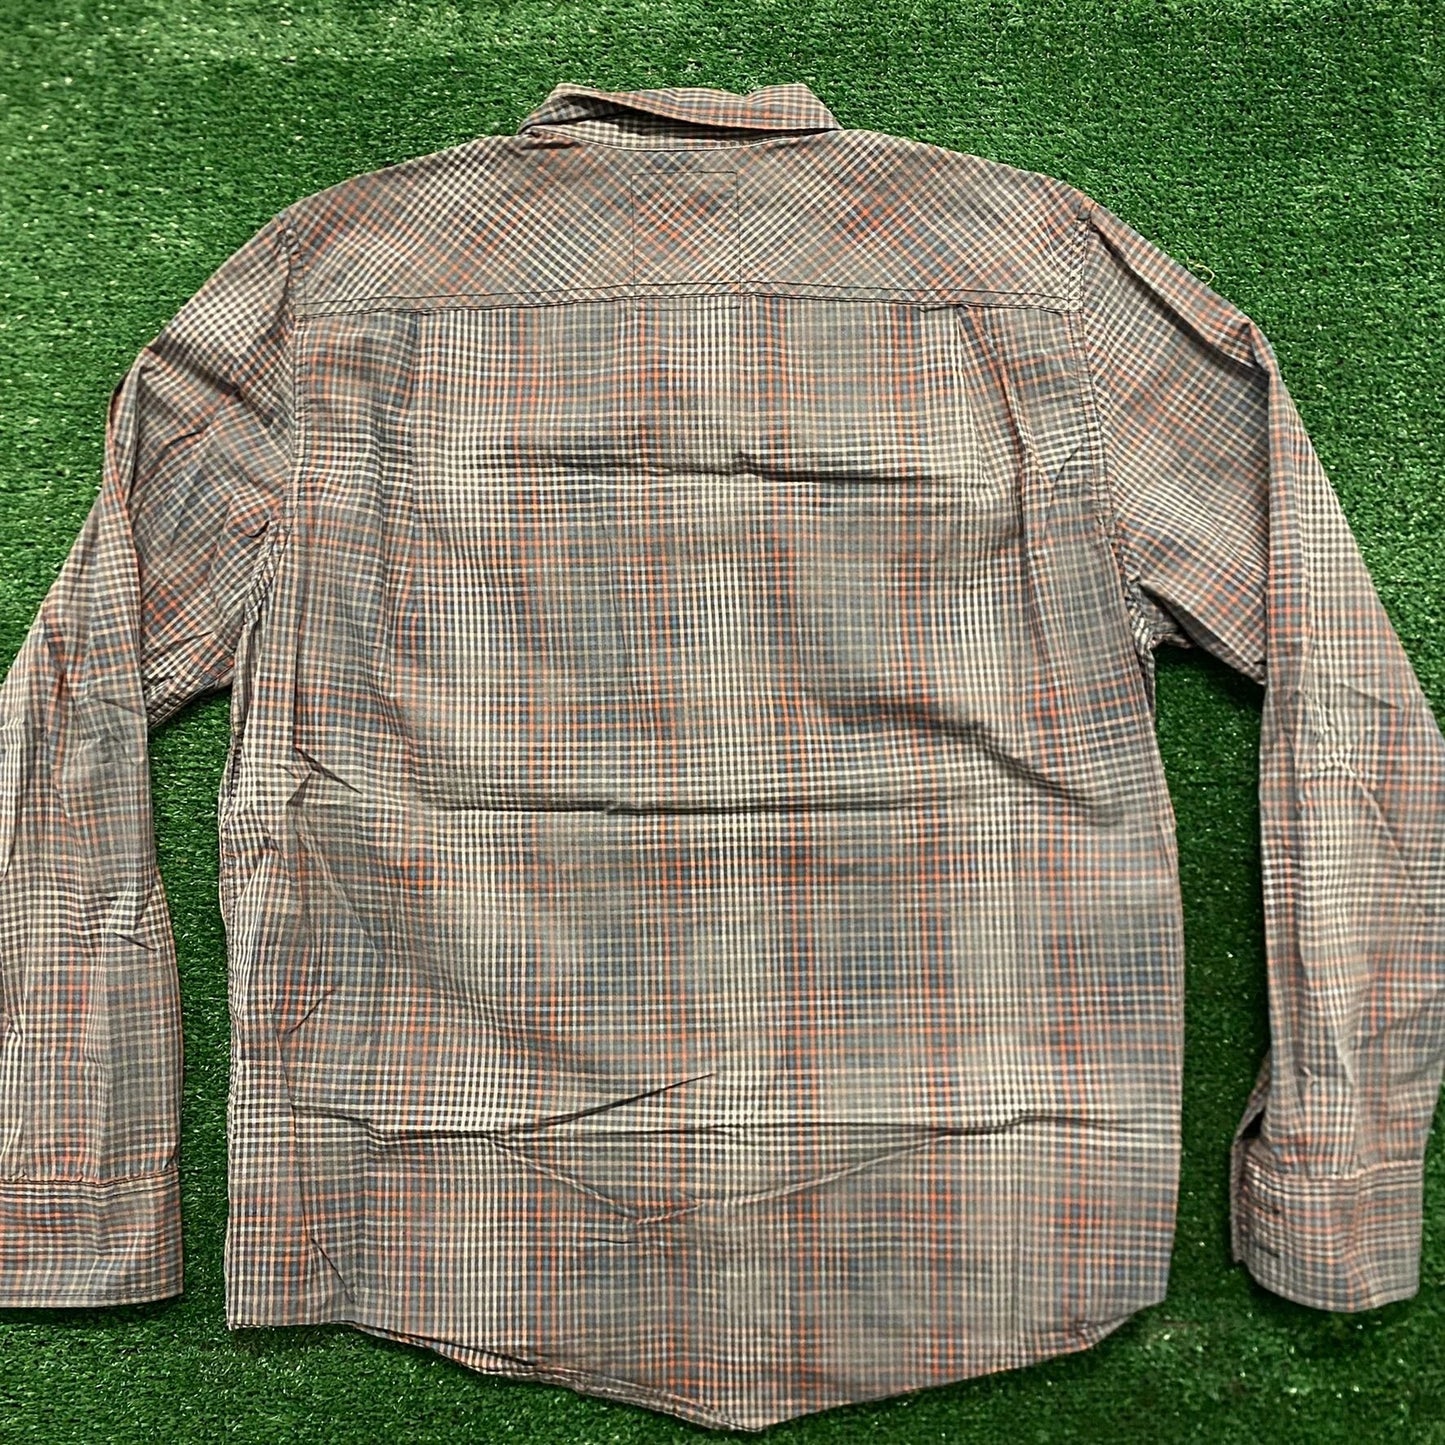 Guess Plaid Check Vintage Casual Button Up Shirt